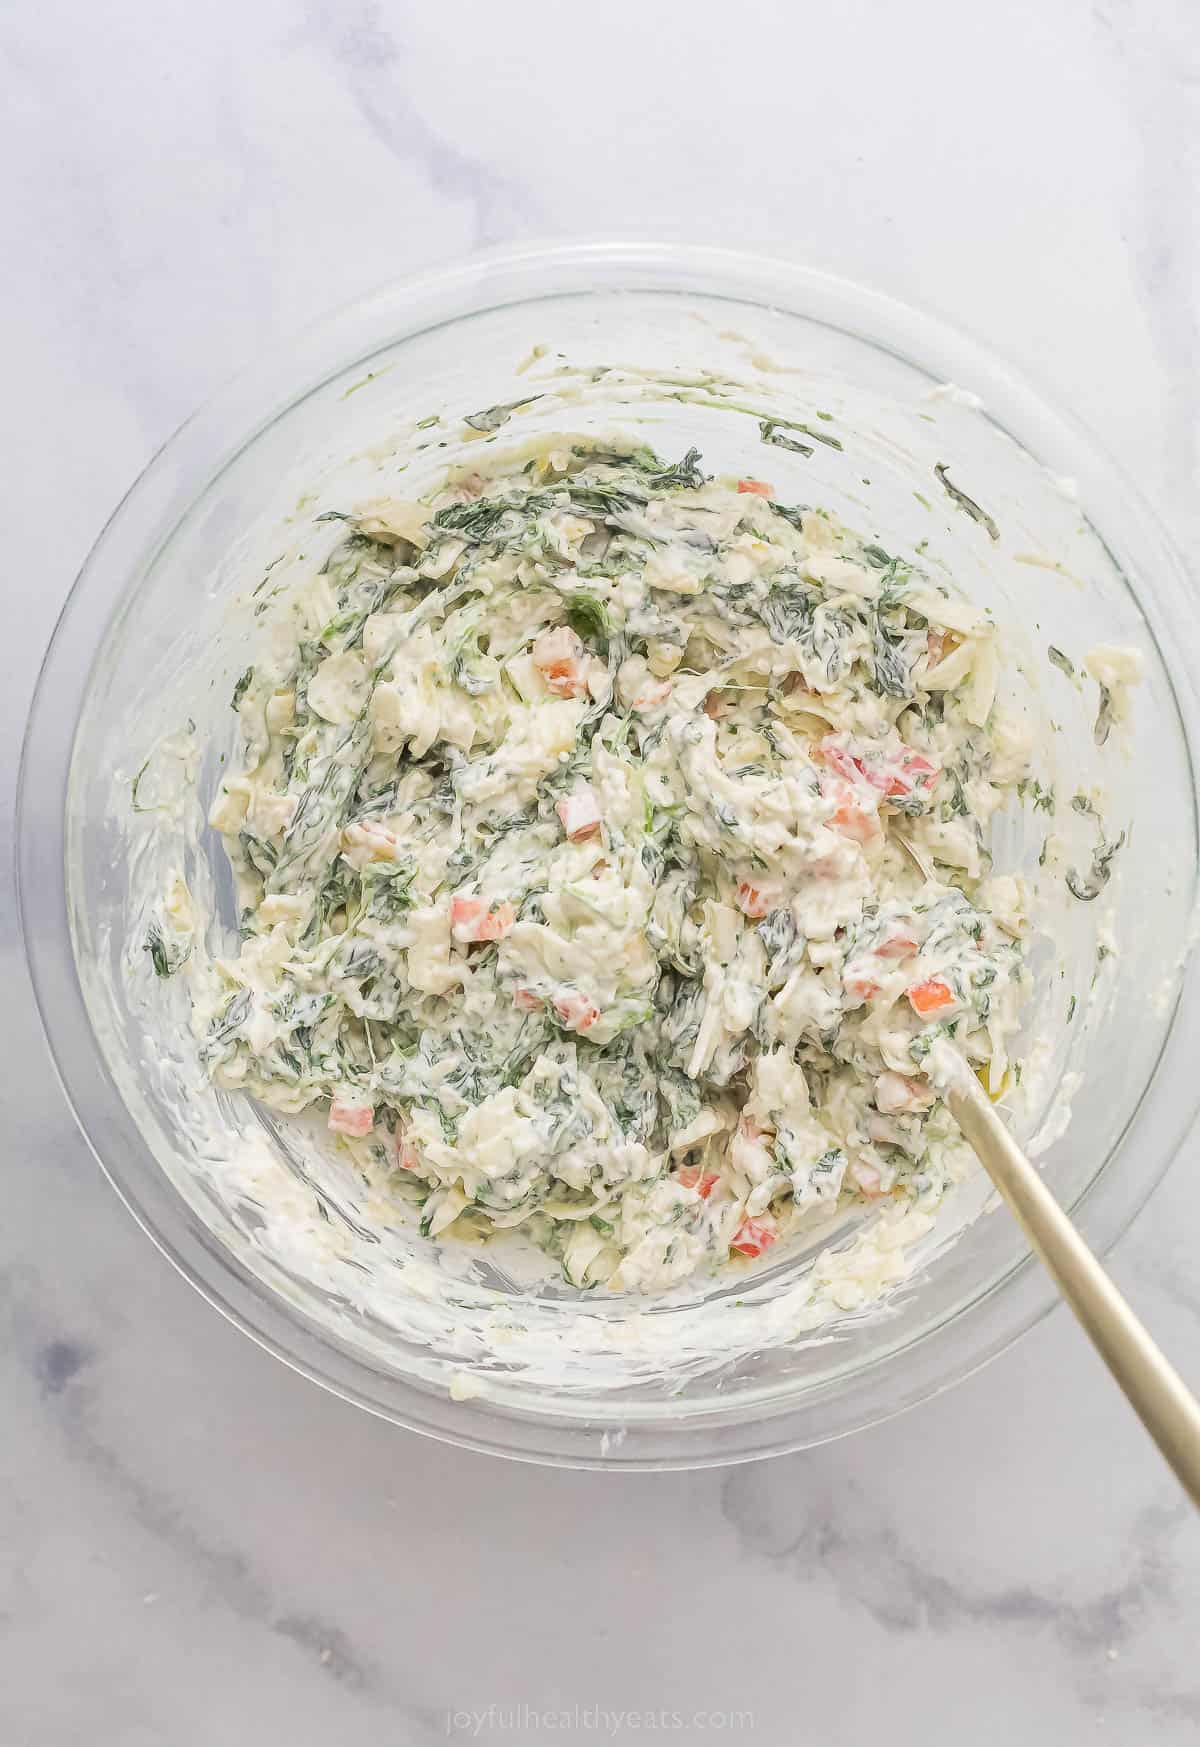 a creamy mixture of cream cheese, red peppers, and spinach in a bowl